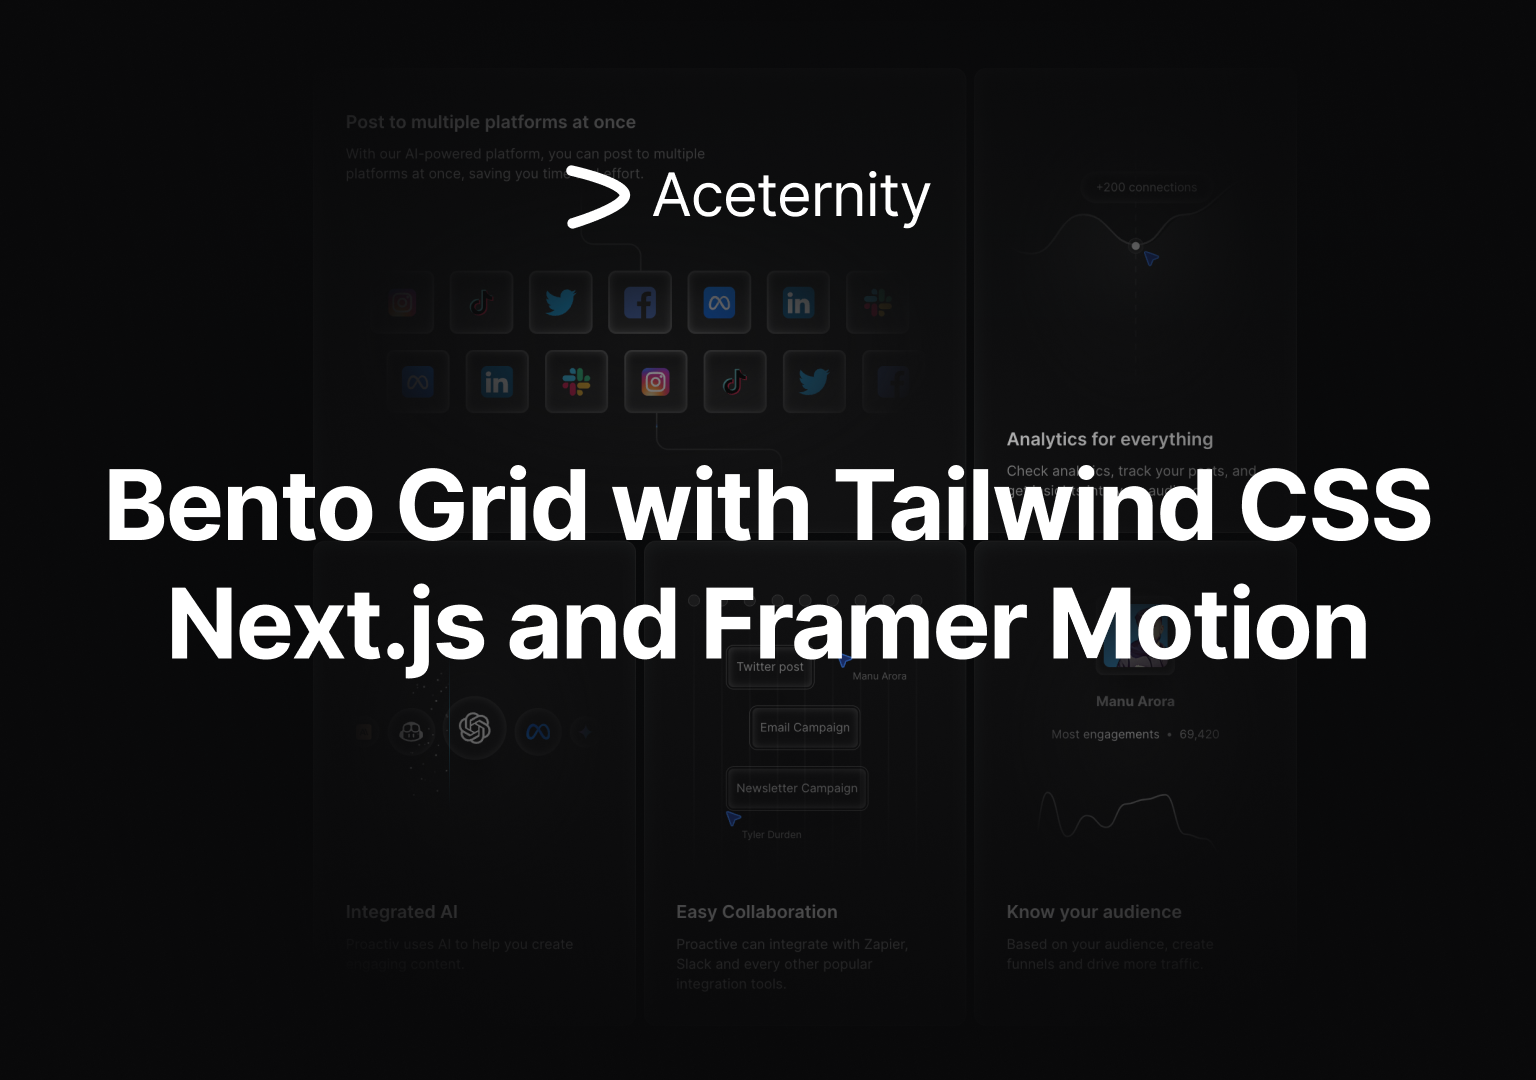 How to create a bento grid with Tailwind CSS, Next.js and Framer Motion